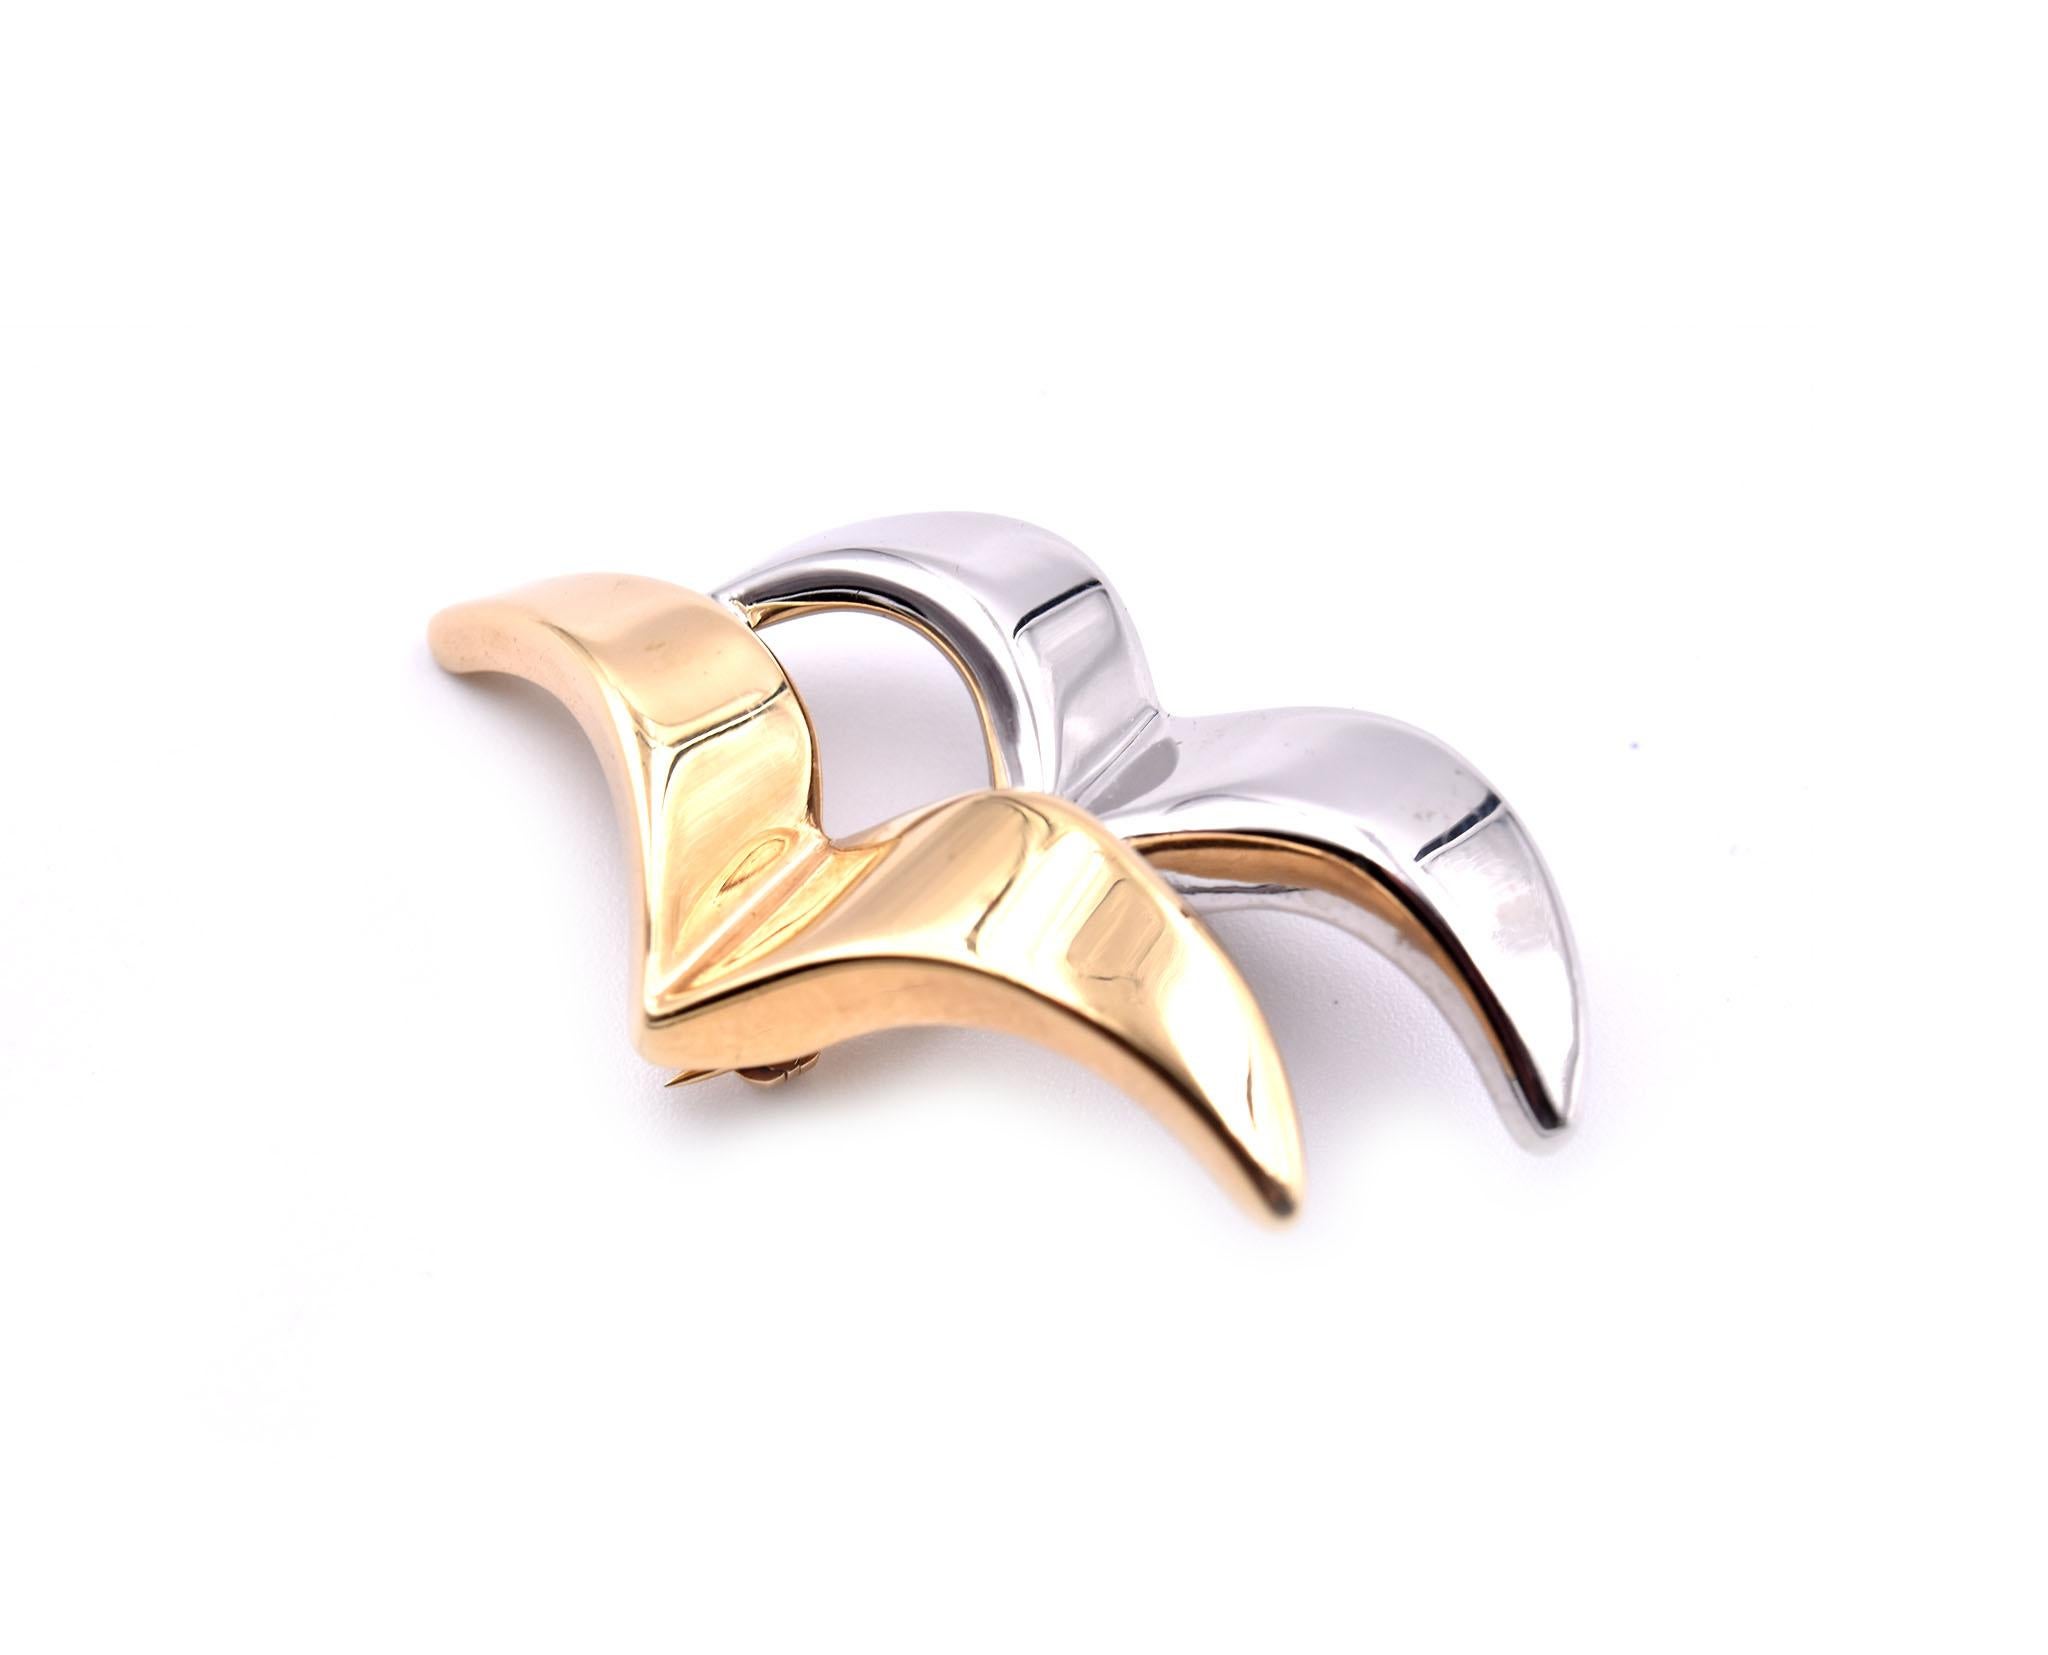 Designer: custom design
Material: 14k yellow and white gold
Dimensions: pin measures 21.50mm long and 41mm wide
Weight: 2.42 grams
